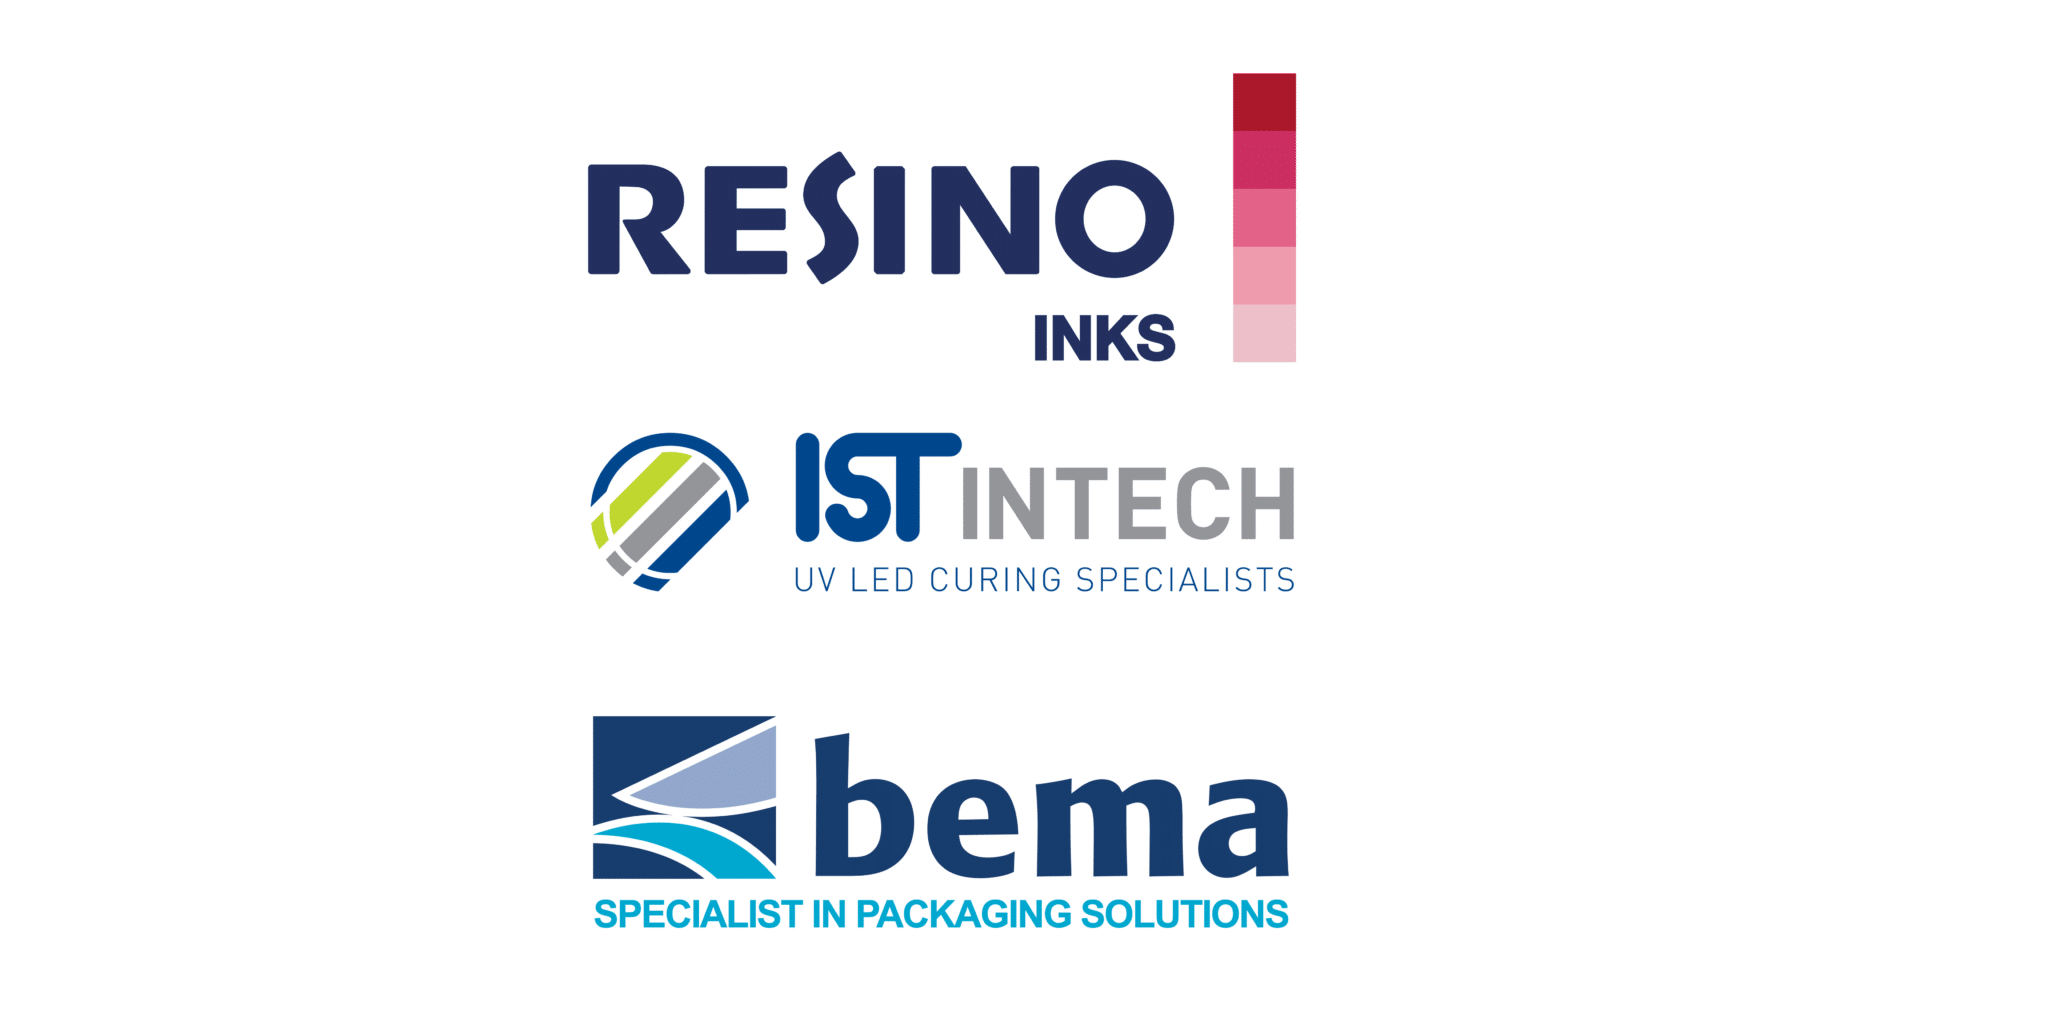 BEMA BV, RESINO INKS AND IST INTECH: PIONEERING SUSTAINABLE PACKAGING SOLUTIONS